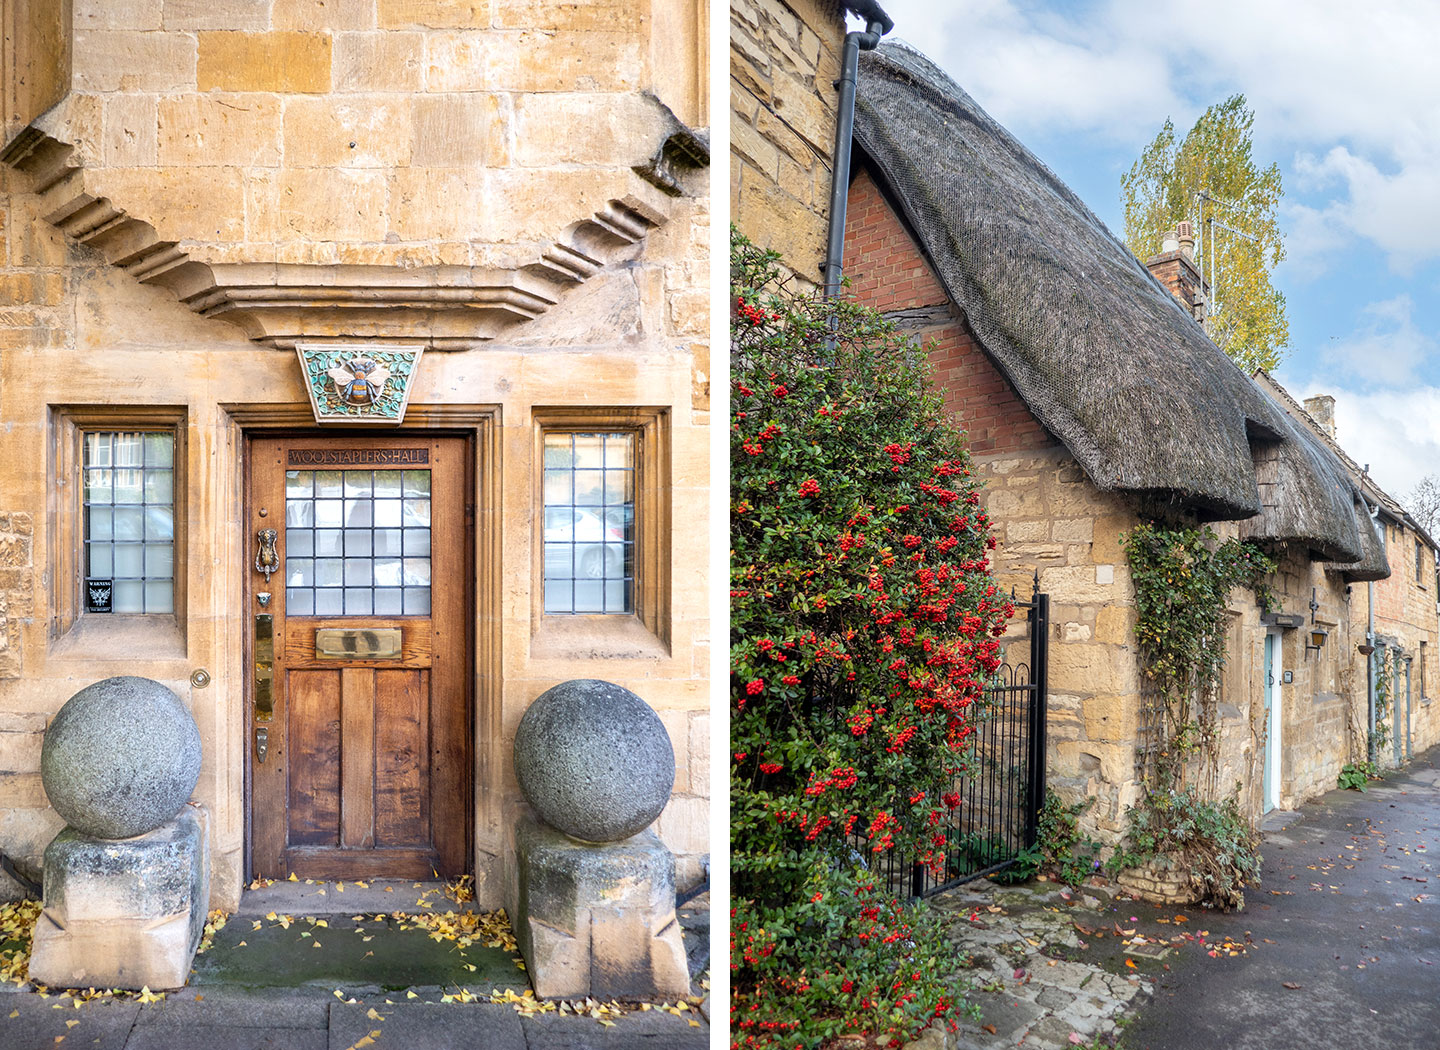 The Woolstaplers Hall and a thatched cottage in Chipping Campden